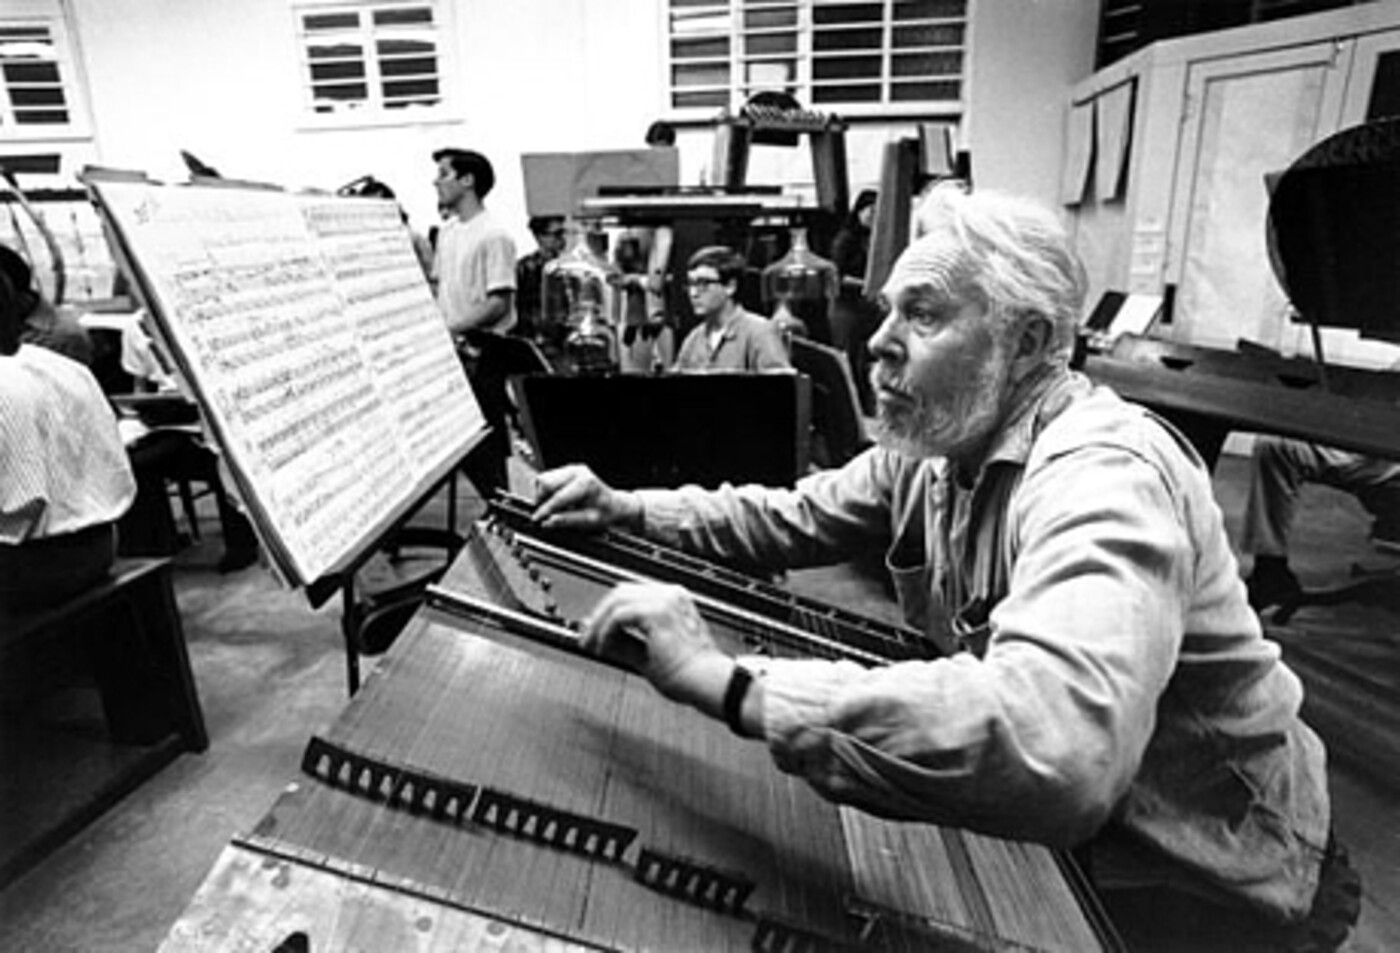 Harry Partch - The dreamer that remains